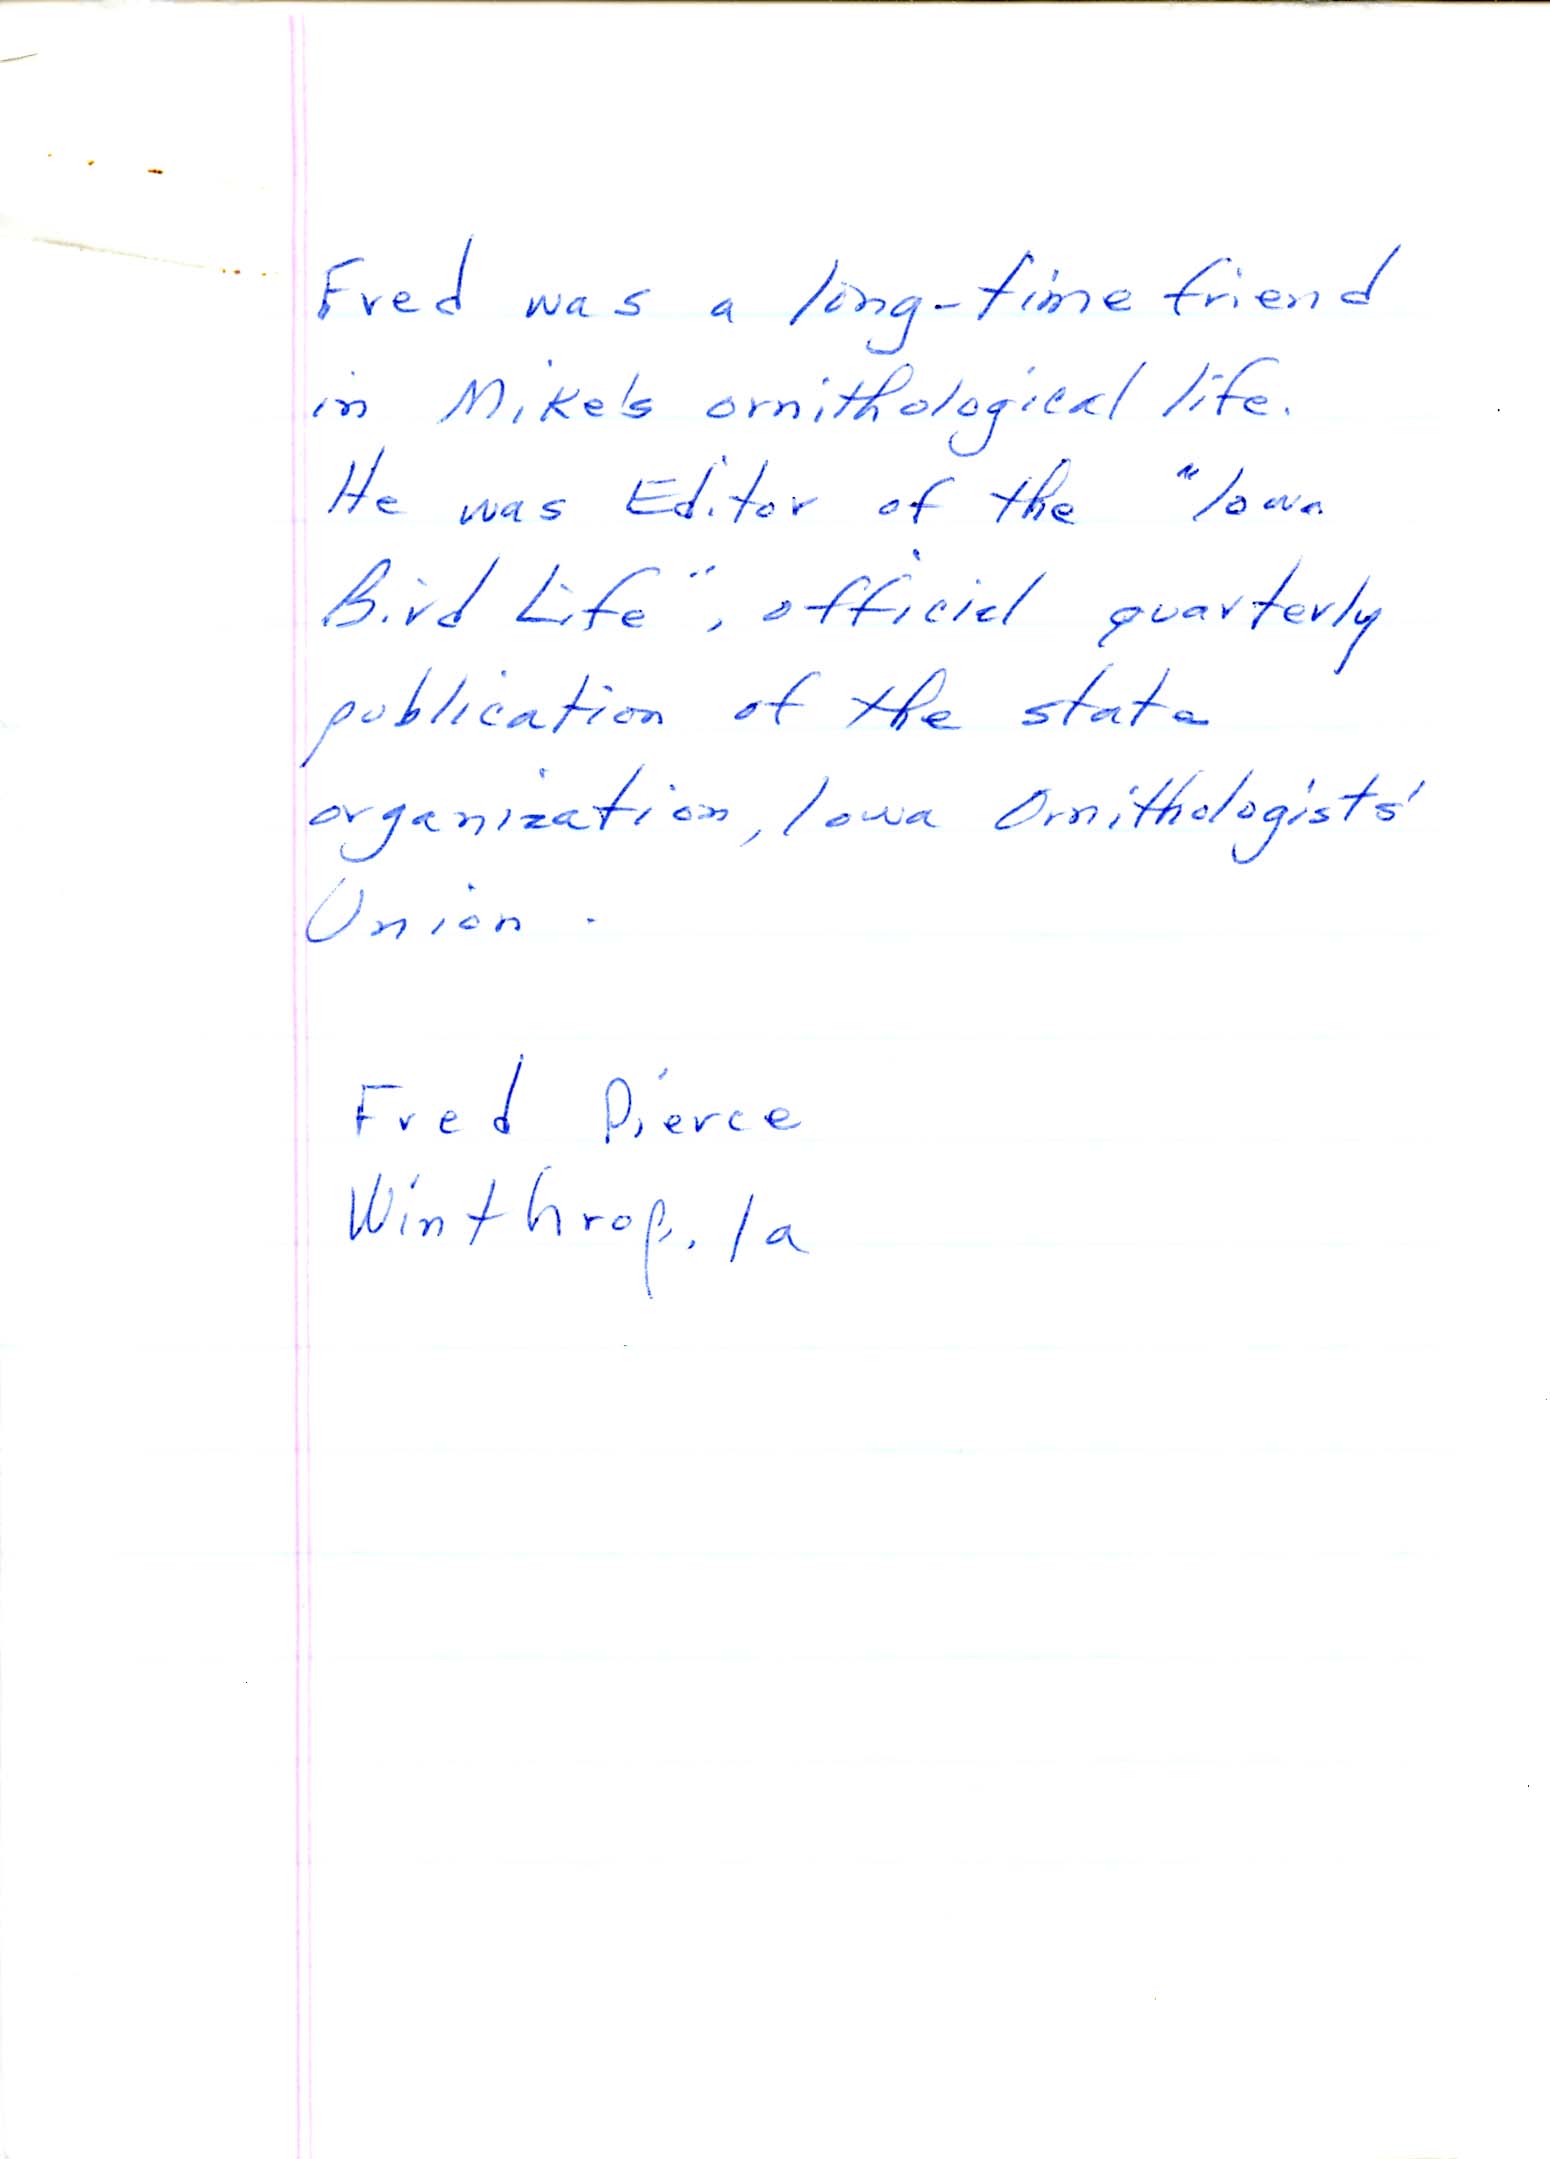 Fred Pierce letter to Oscar Allert regarding stamp collecting, May 20, 1939